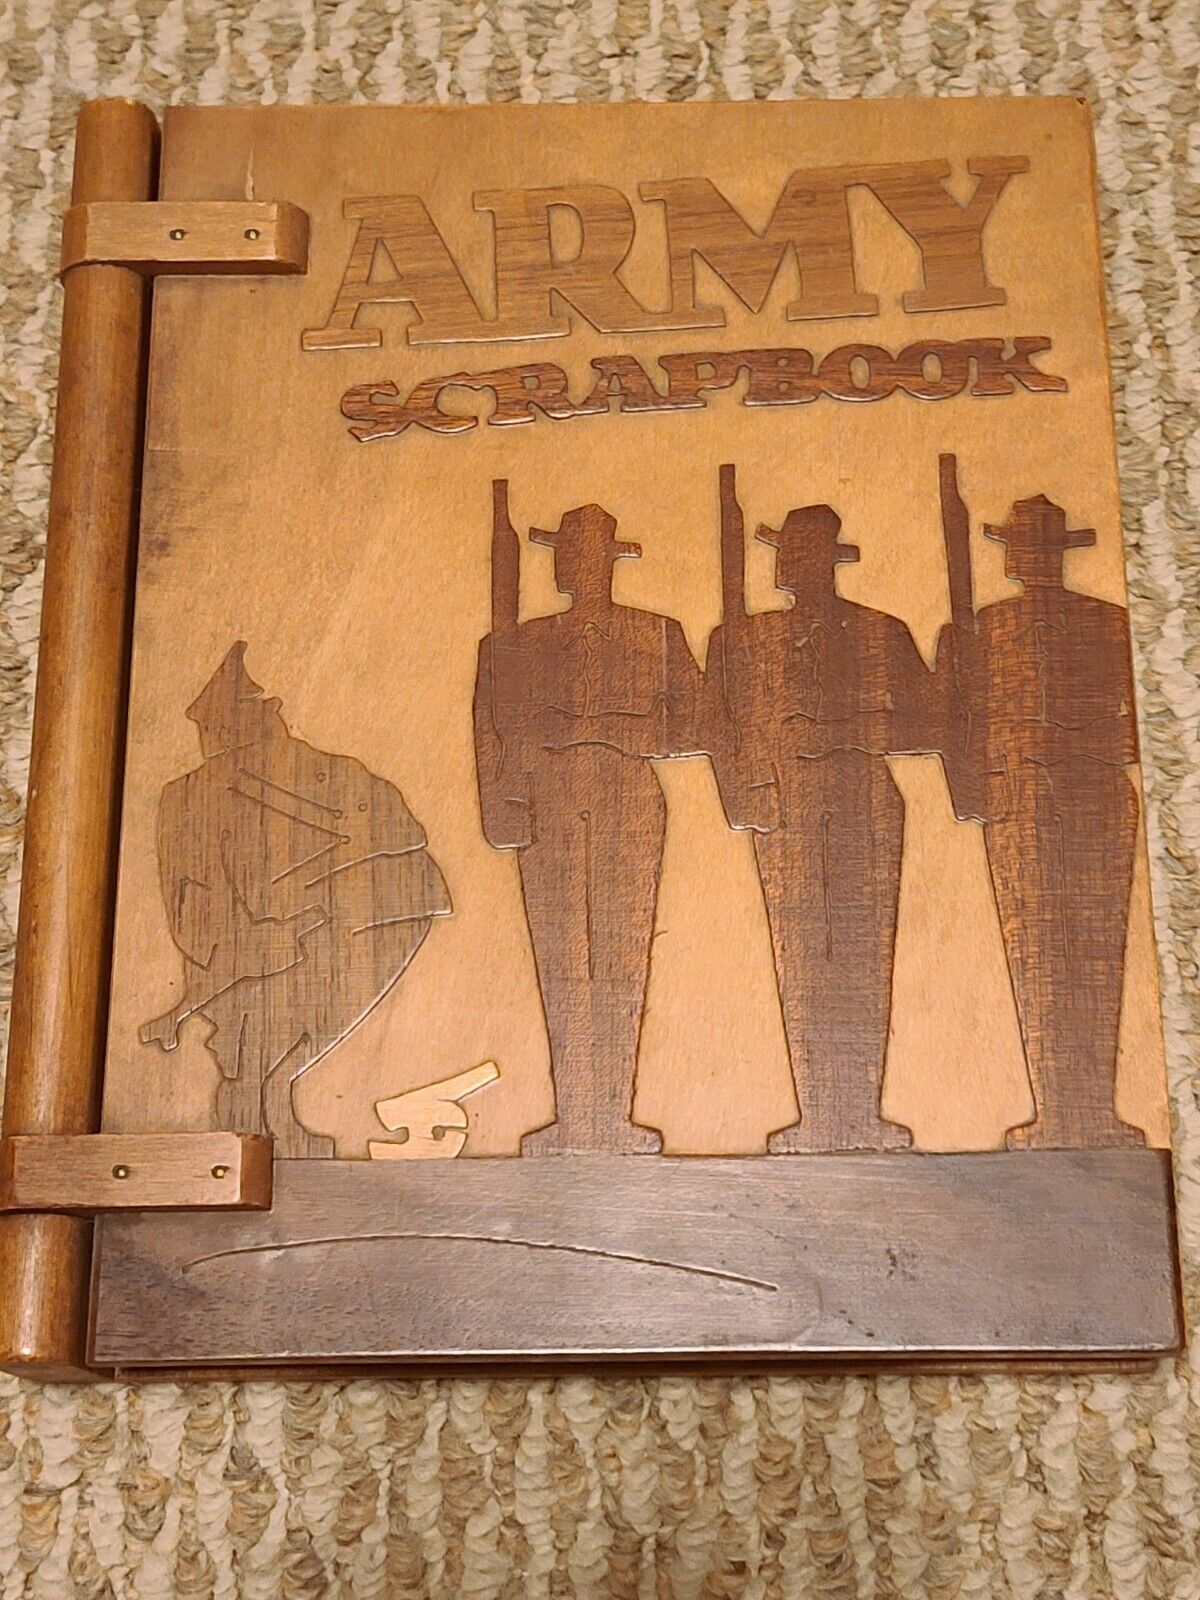 Original WWII U.S. Soldier\'s Personal Photo Album with Trench Art Folk Art Cover